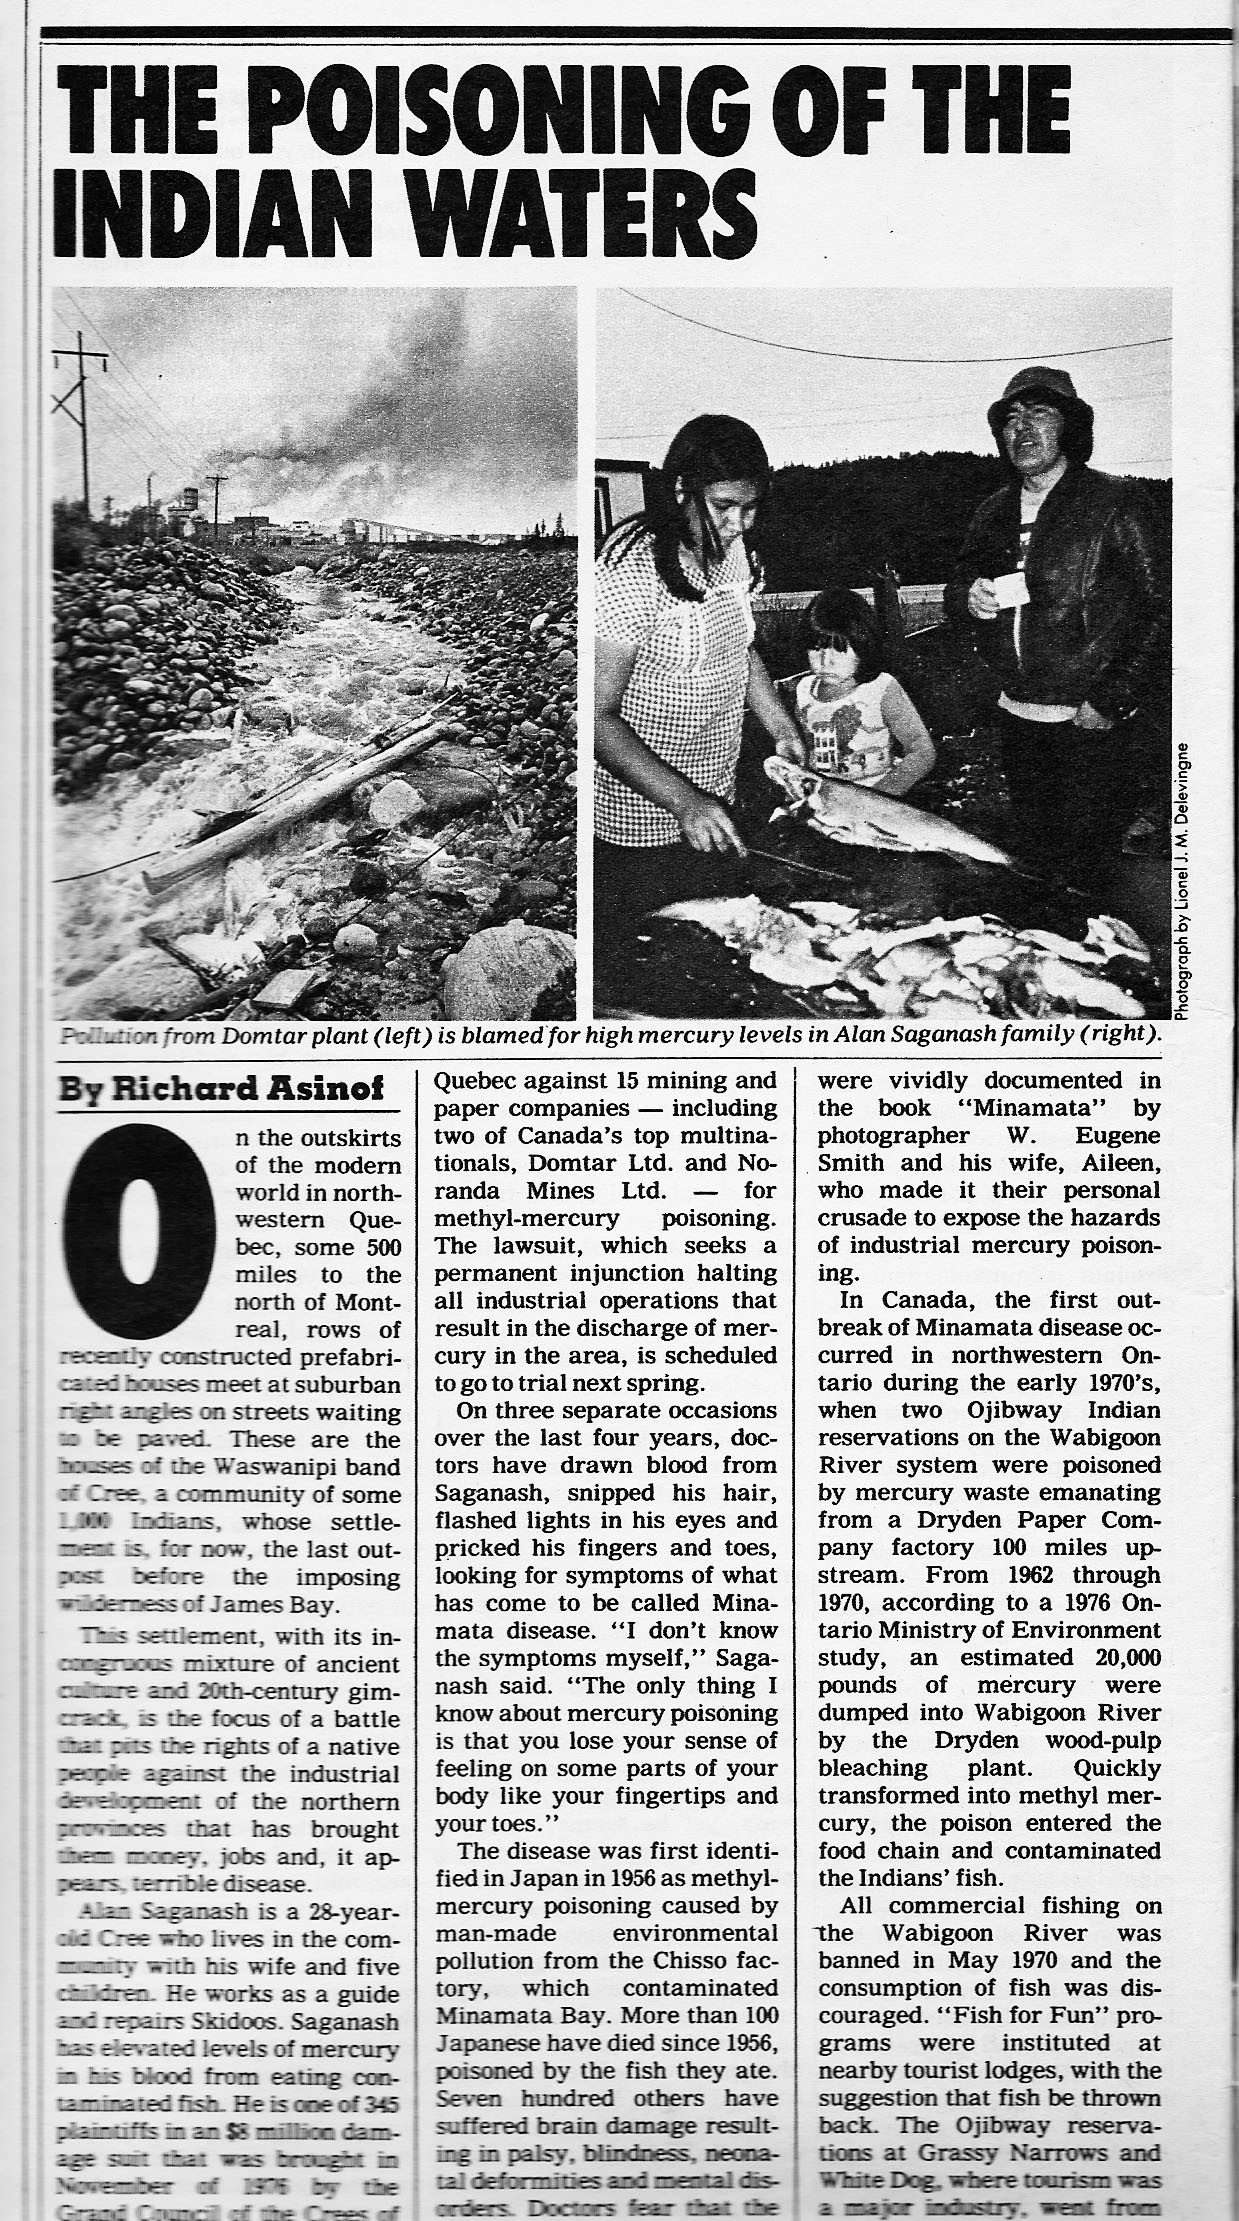 The first page of the October 1979 article in the New York Times Magazine, "The Poisoning of the Indian Waters."